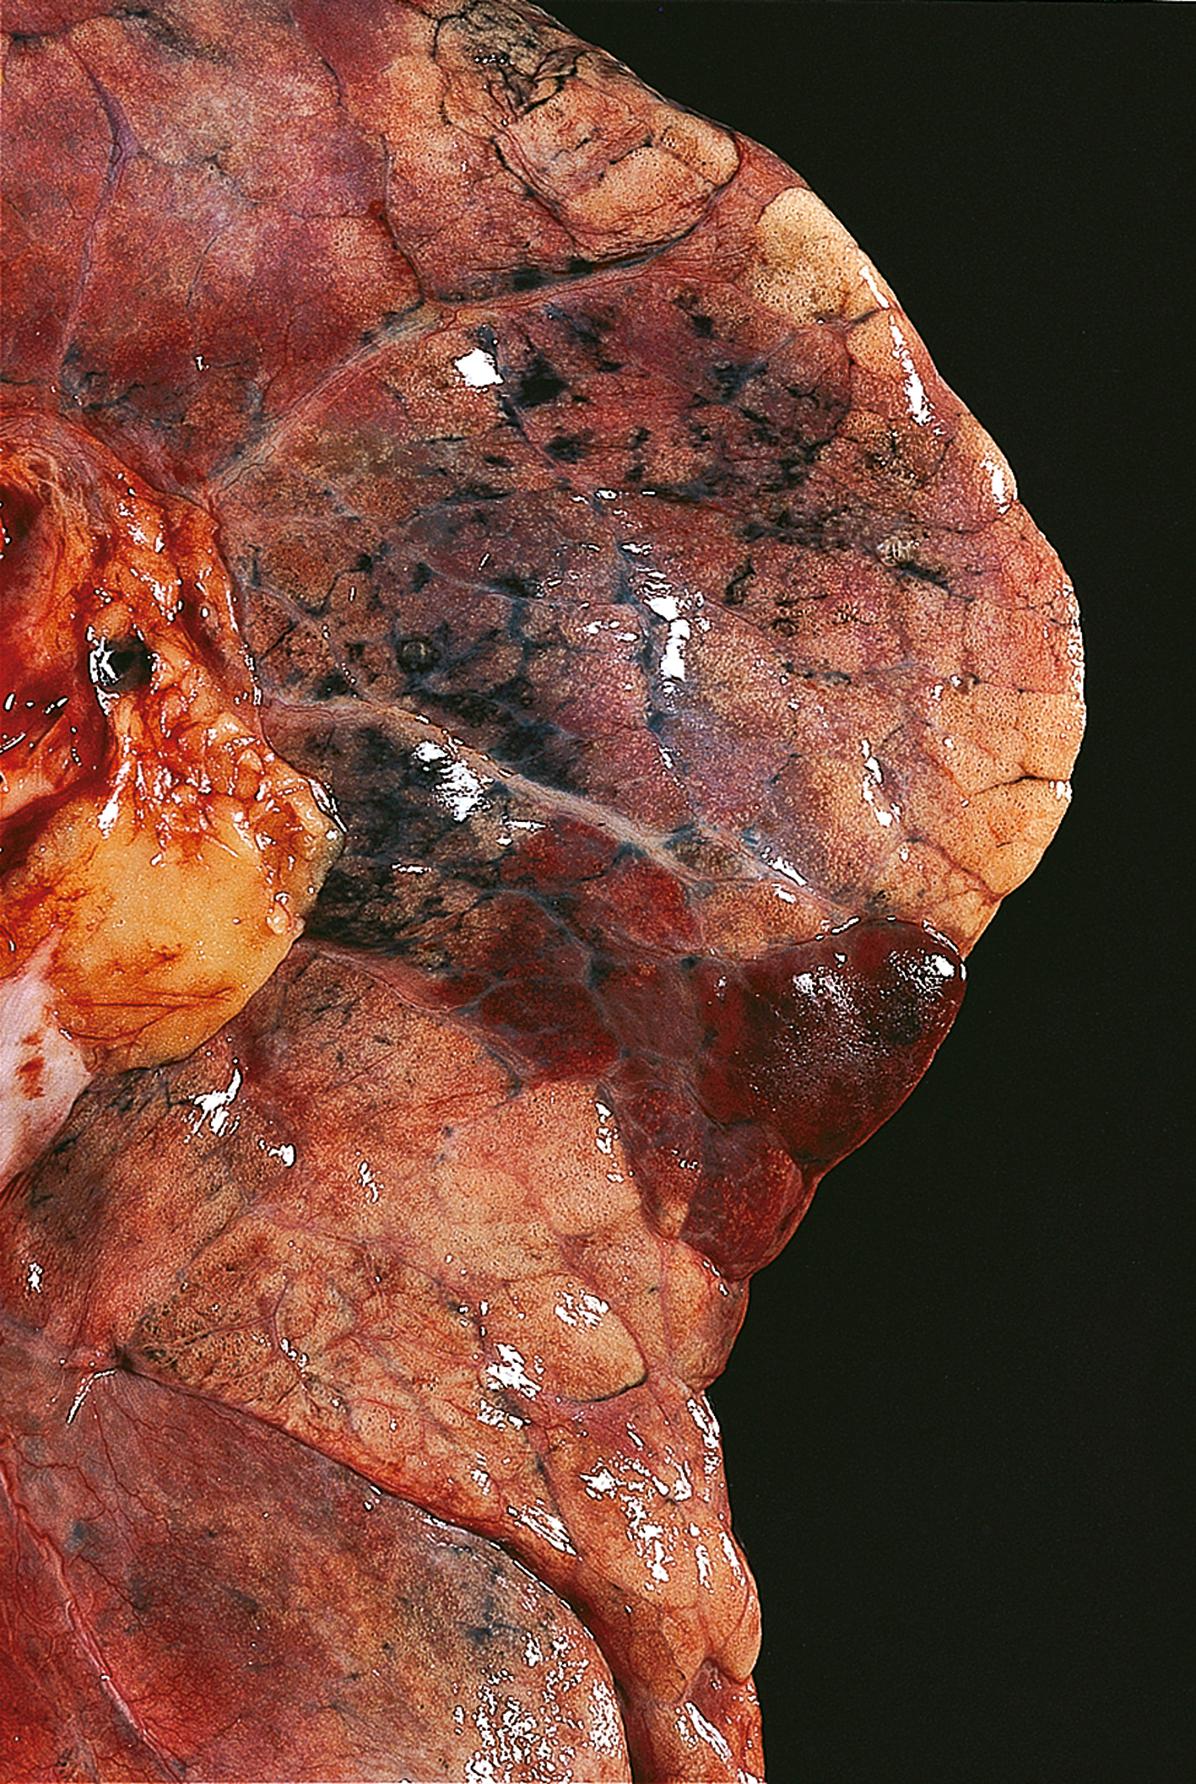 E-Fig. 10.4 G, Pulmonary infarction due to thrombo-embolism. This lung contains a wedge-shaped area of infarction caused by a thrombo-embolism. This area appears haemorrhagic and is firm and elevated above the level of the adjacent normal lung tissue.